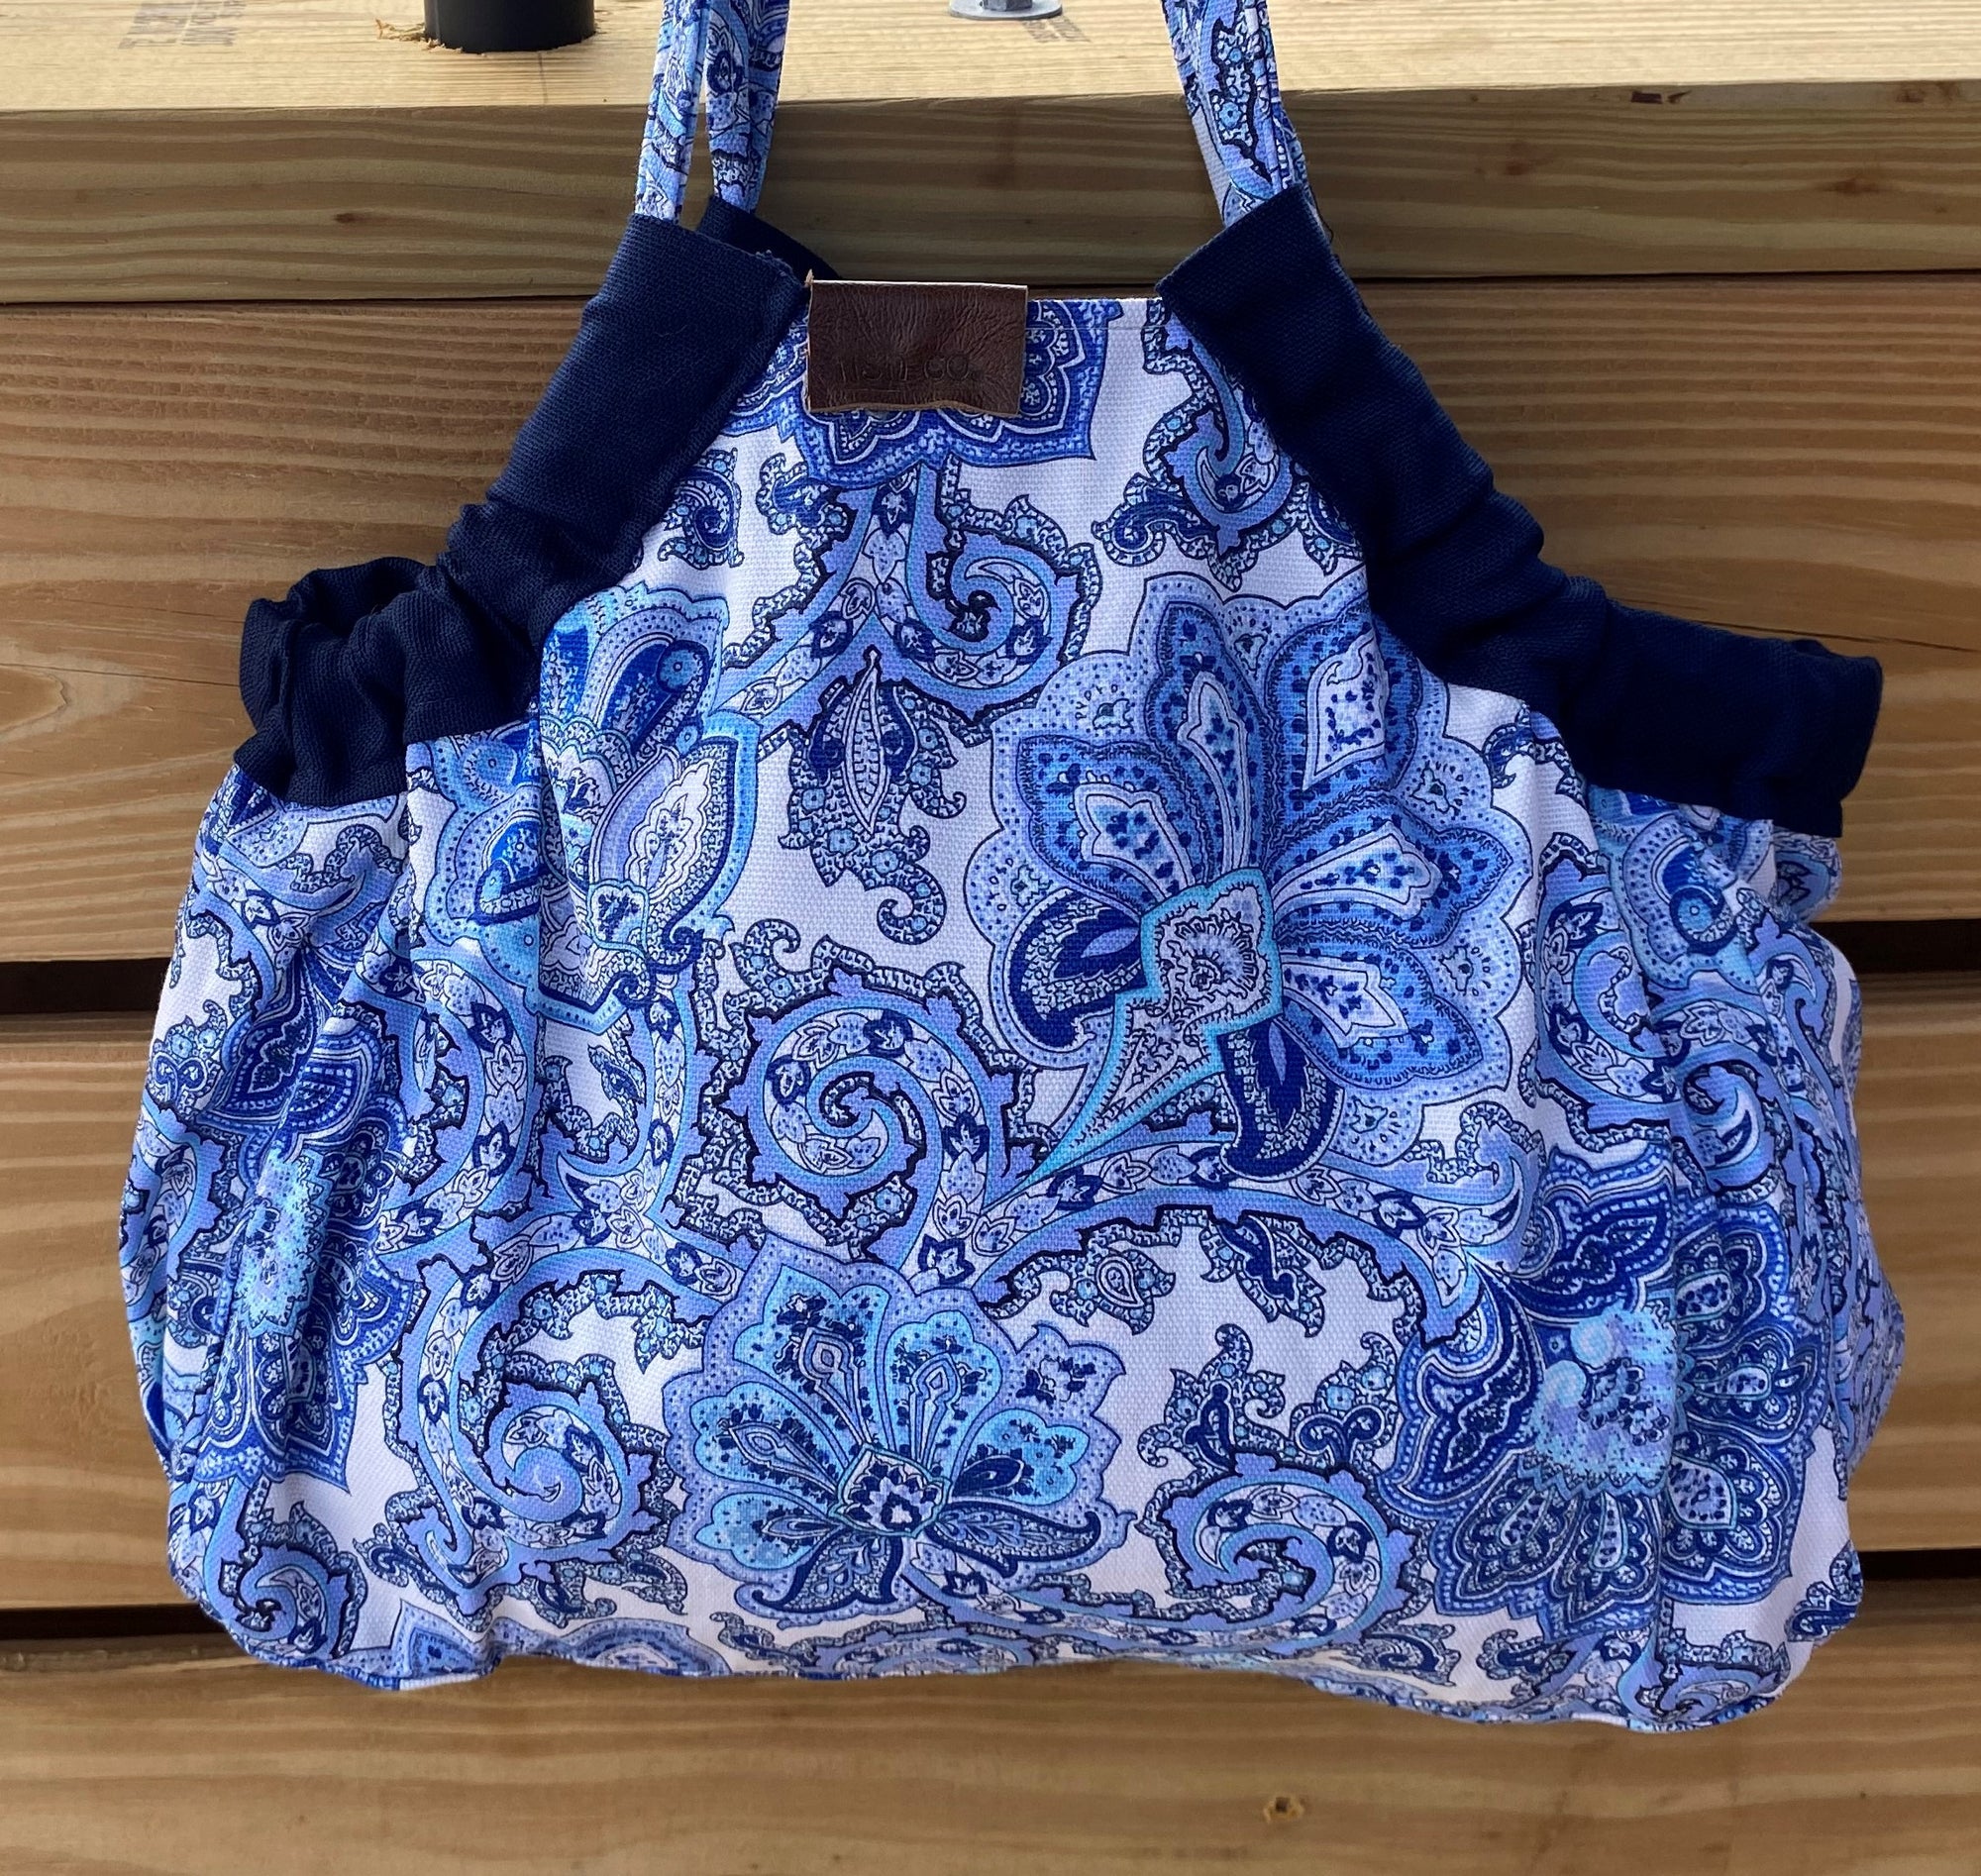 Mini Samaki - White and Blue Paisley/Navy with White Accent Knotted Design